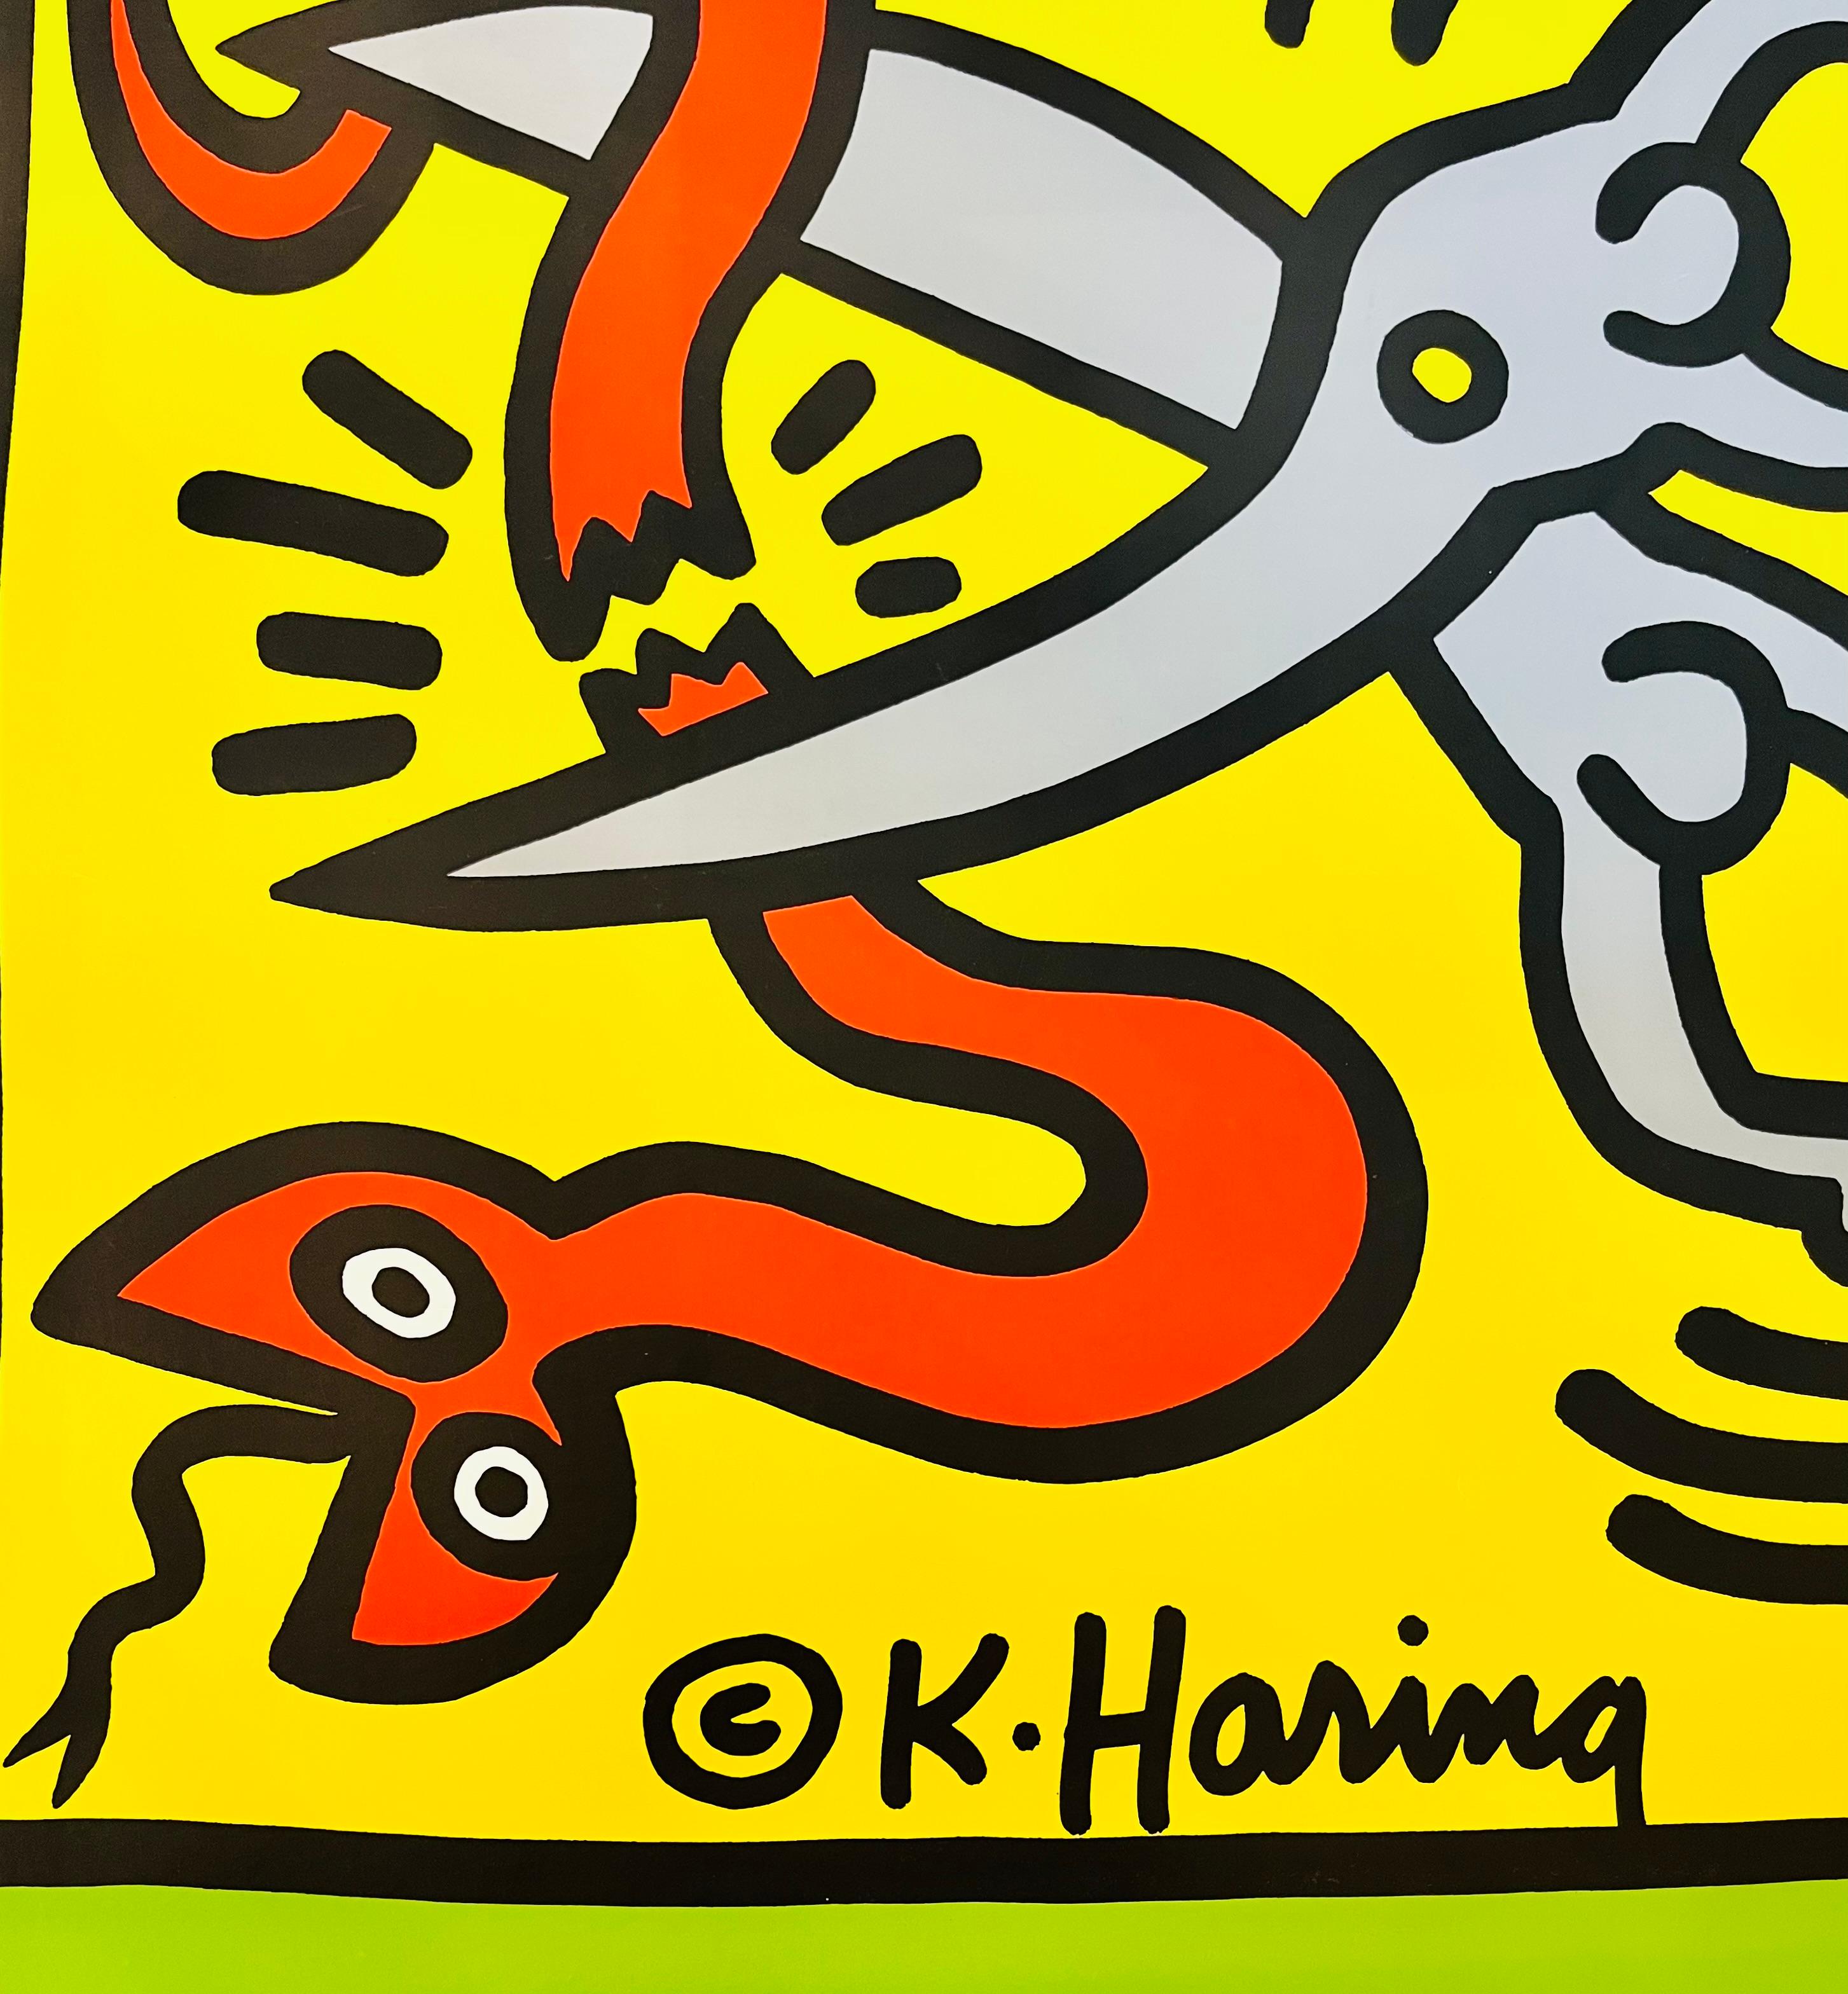 Keith Haring Stop Aids poster 1989  (Keith Haring activist poster) 1